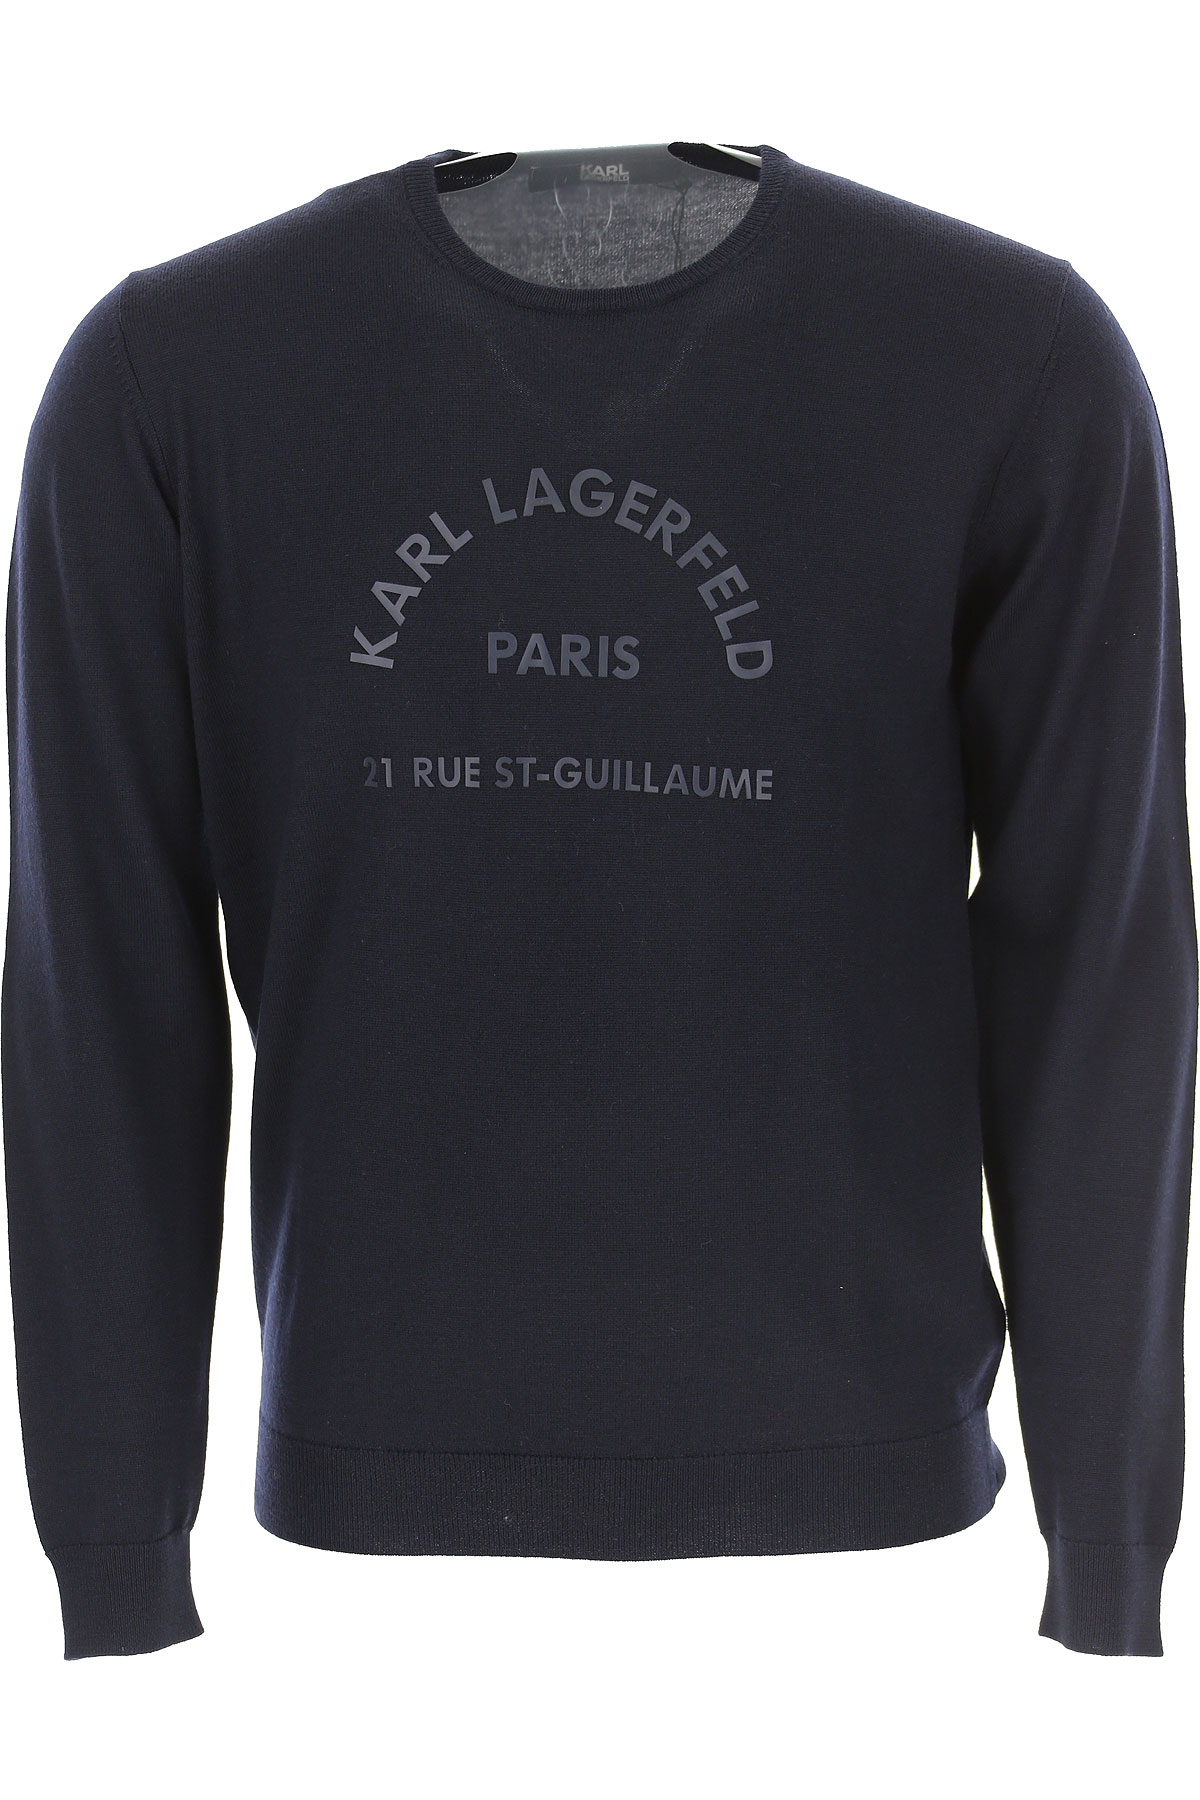 Mens Clothing Karl Lagerfeld, Style code: 655012-592399-690